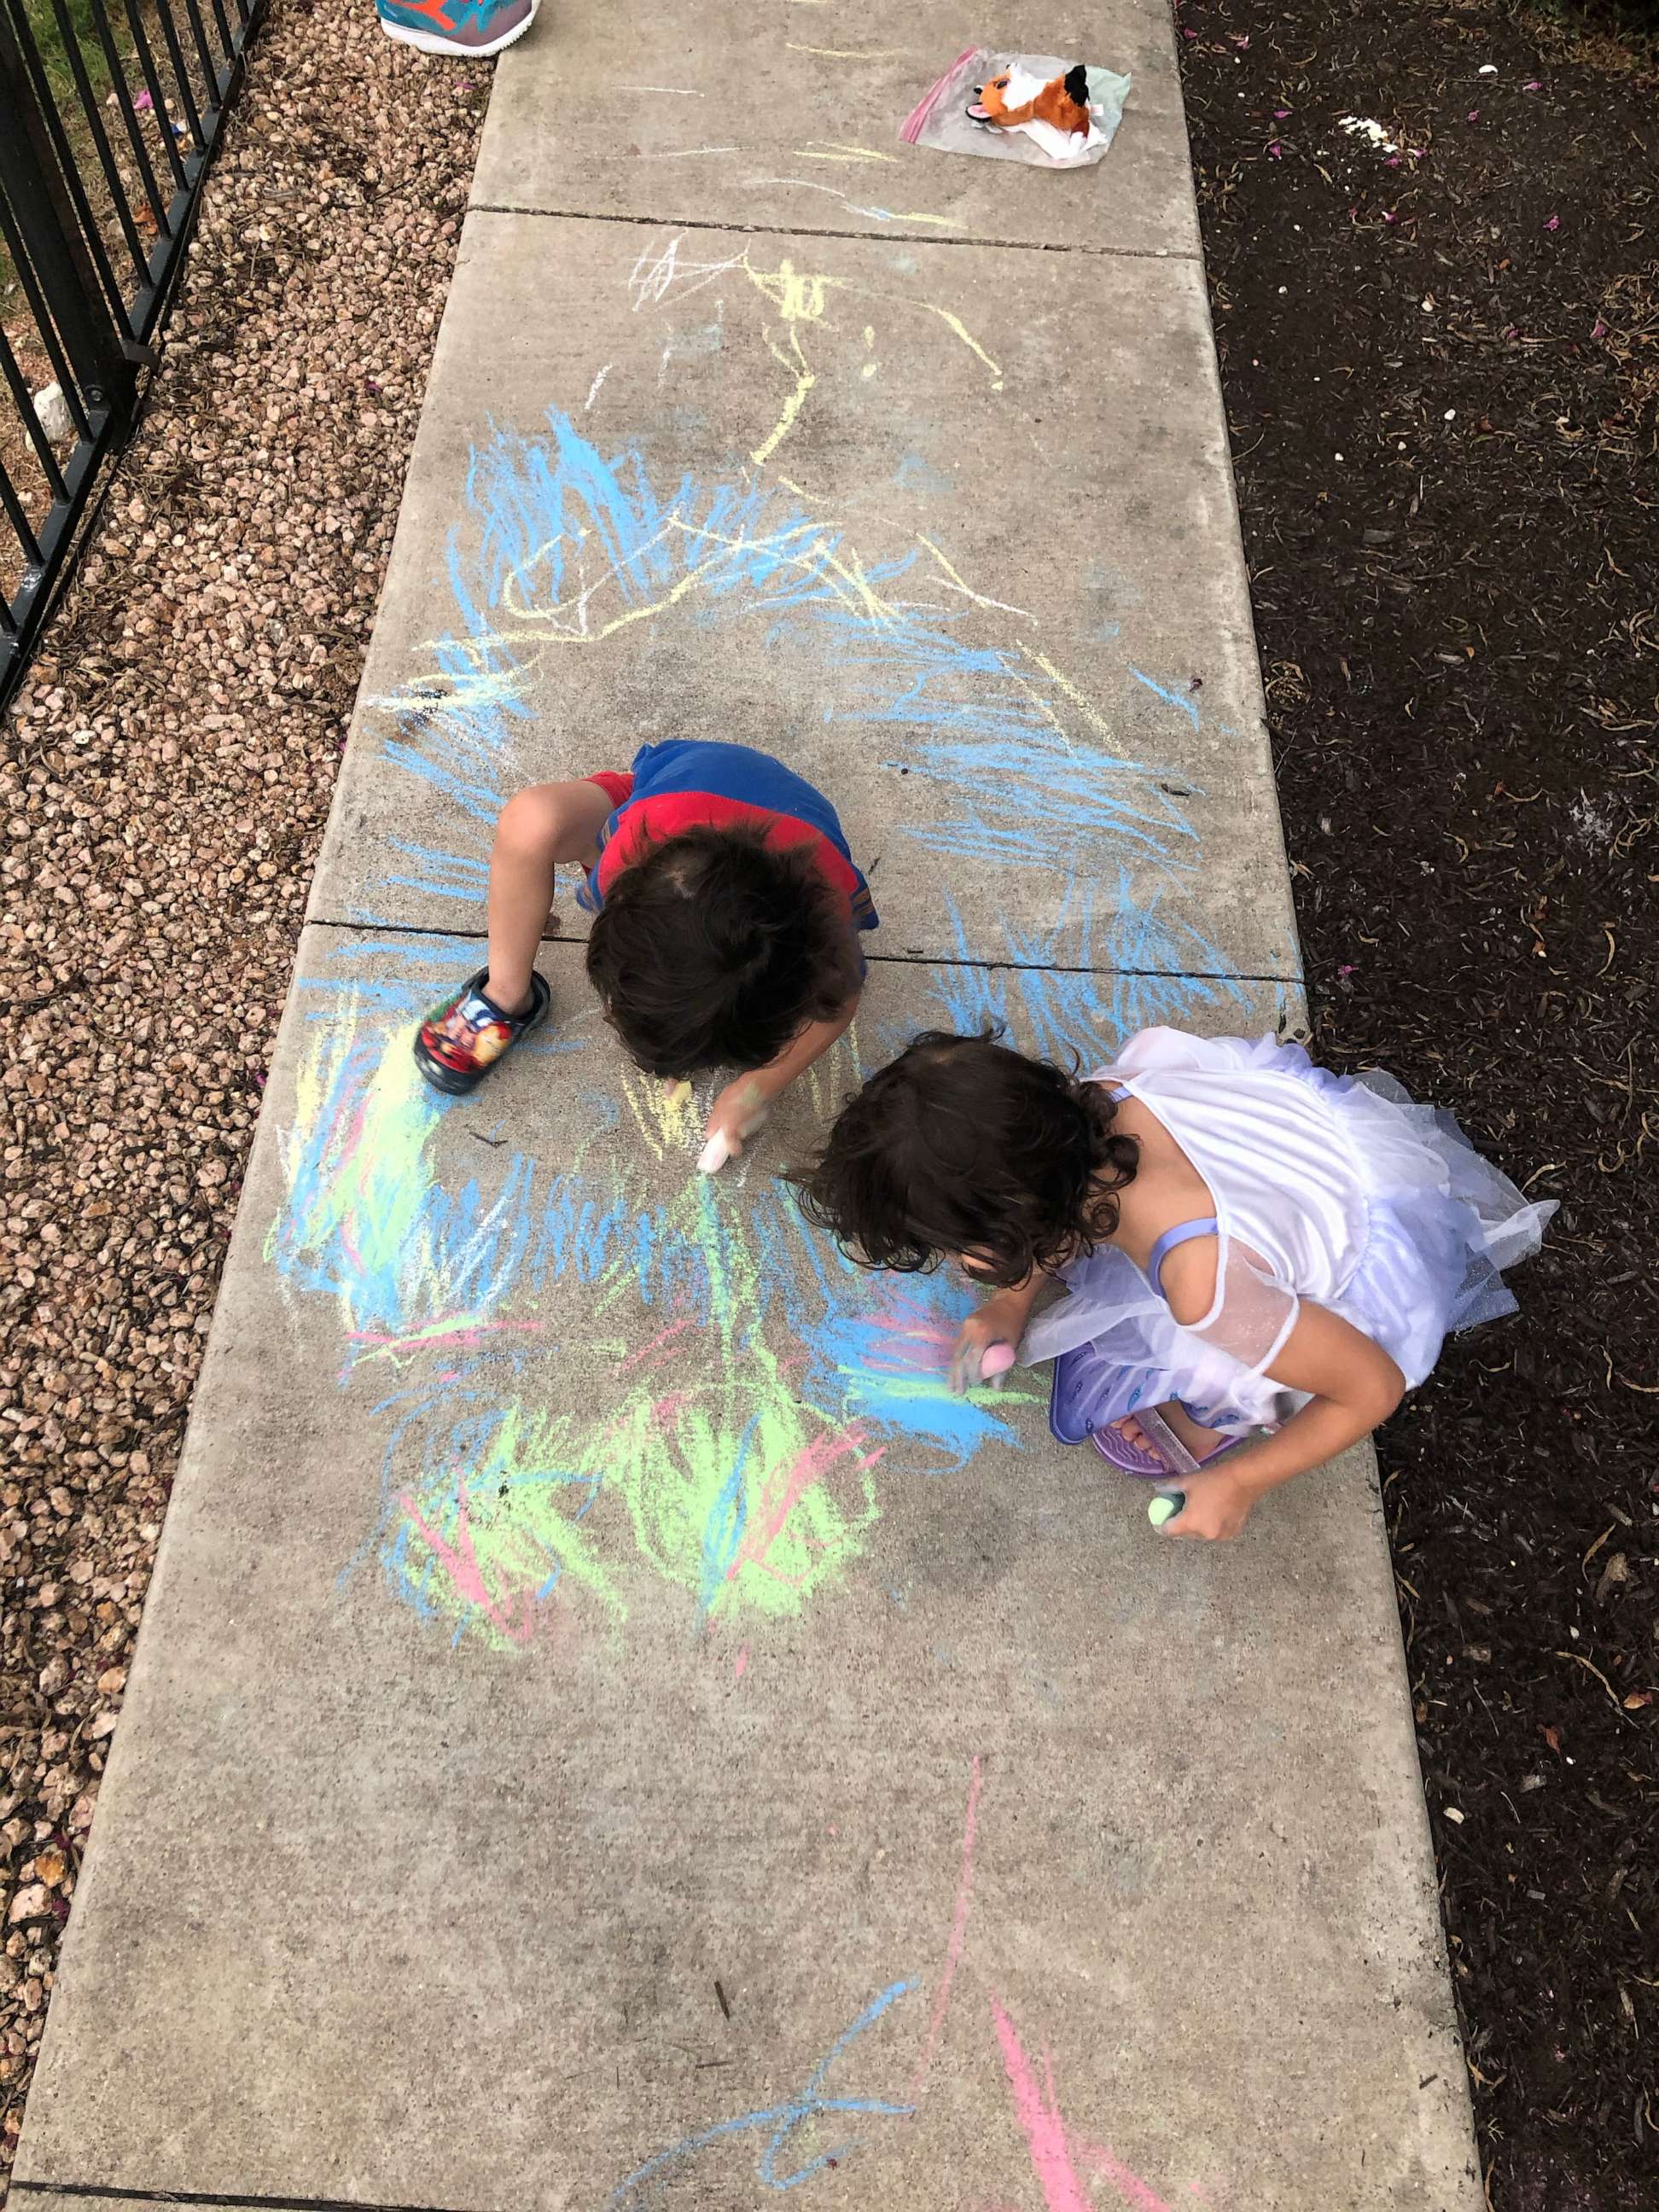 PHOTO: Elsa, a trans girl, can be seen drawing on the sidewalk with her sibling.